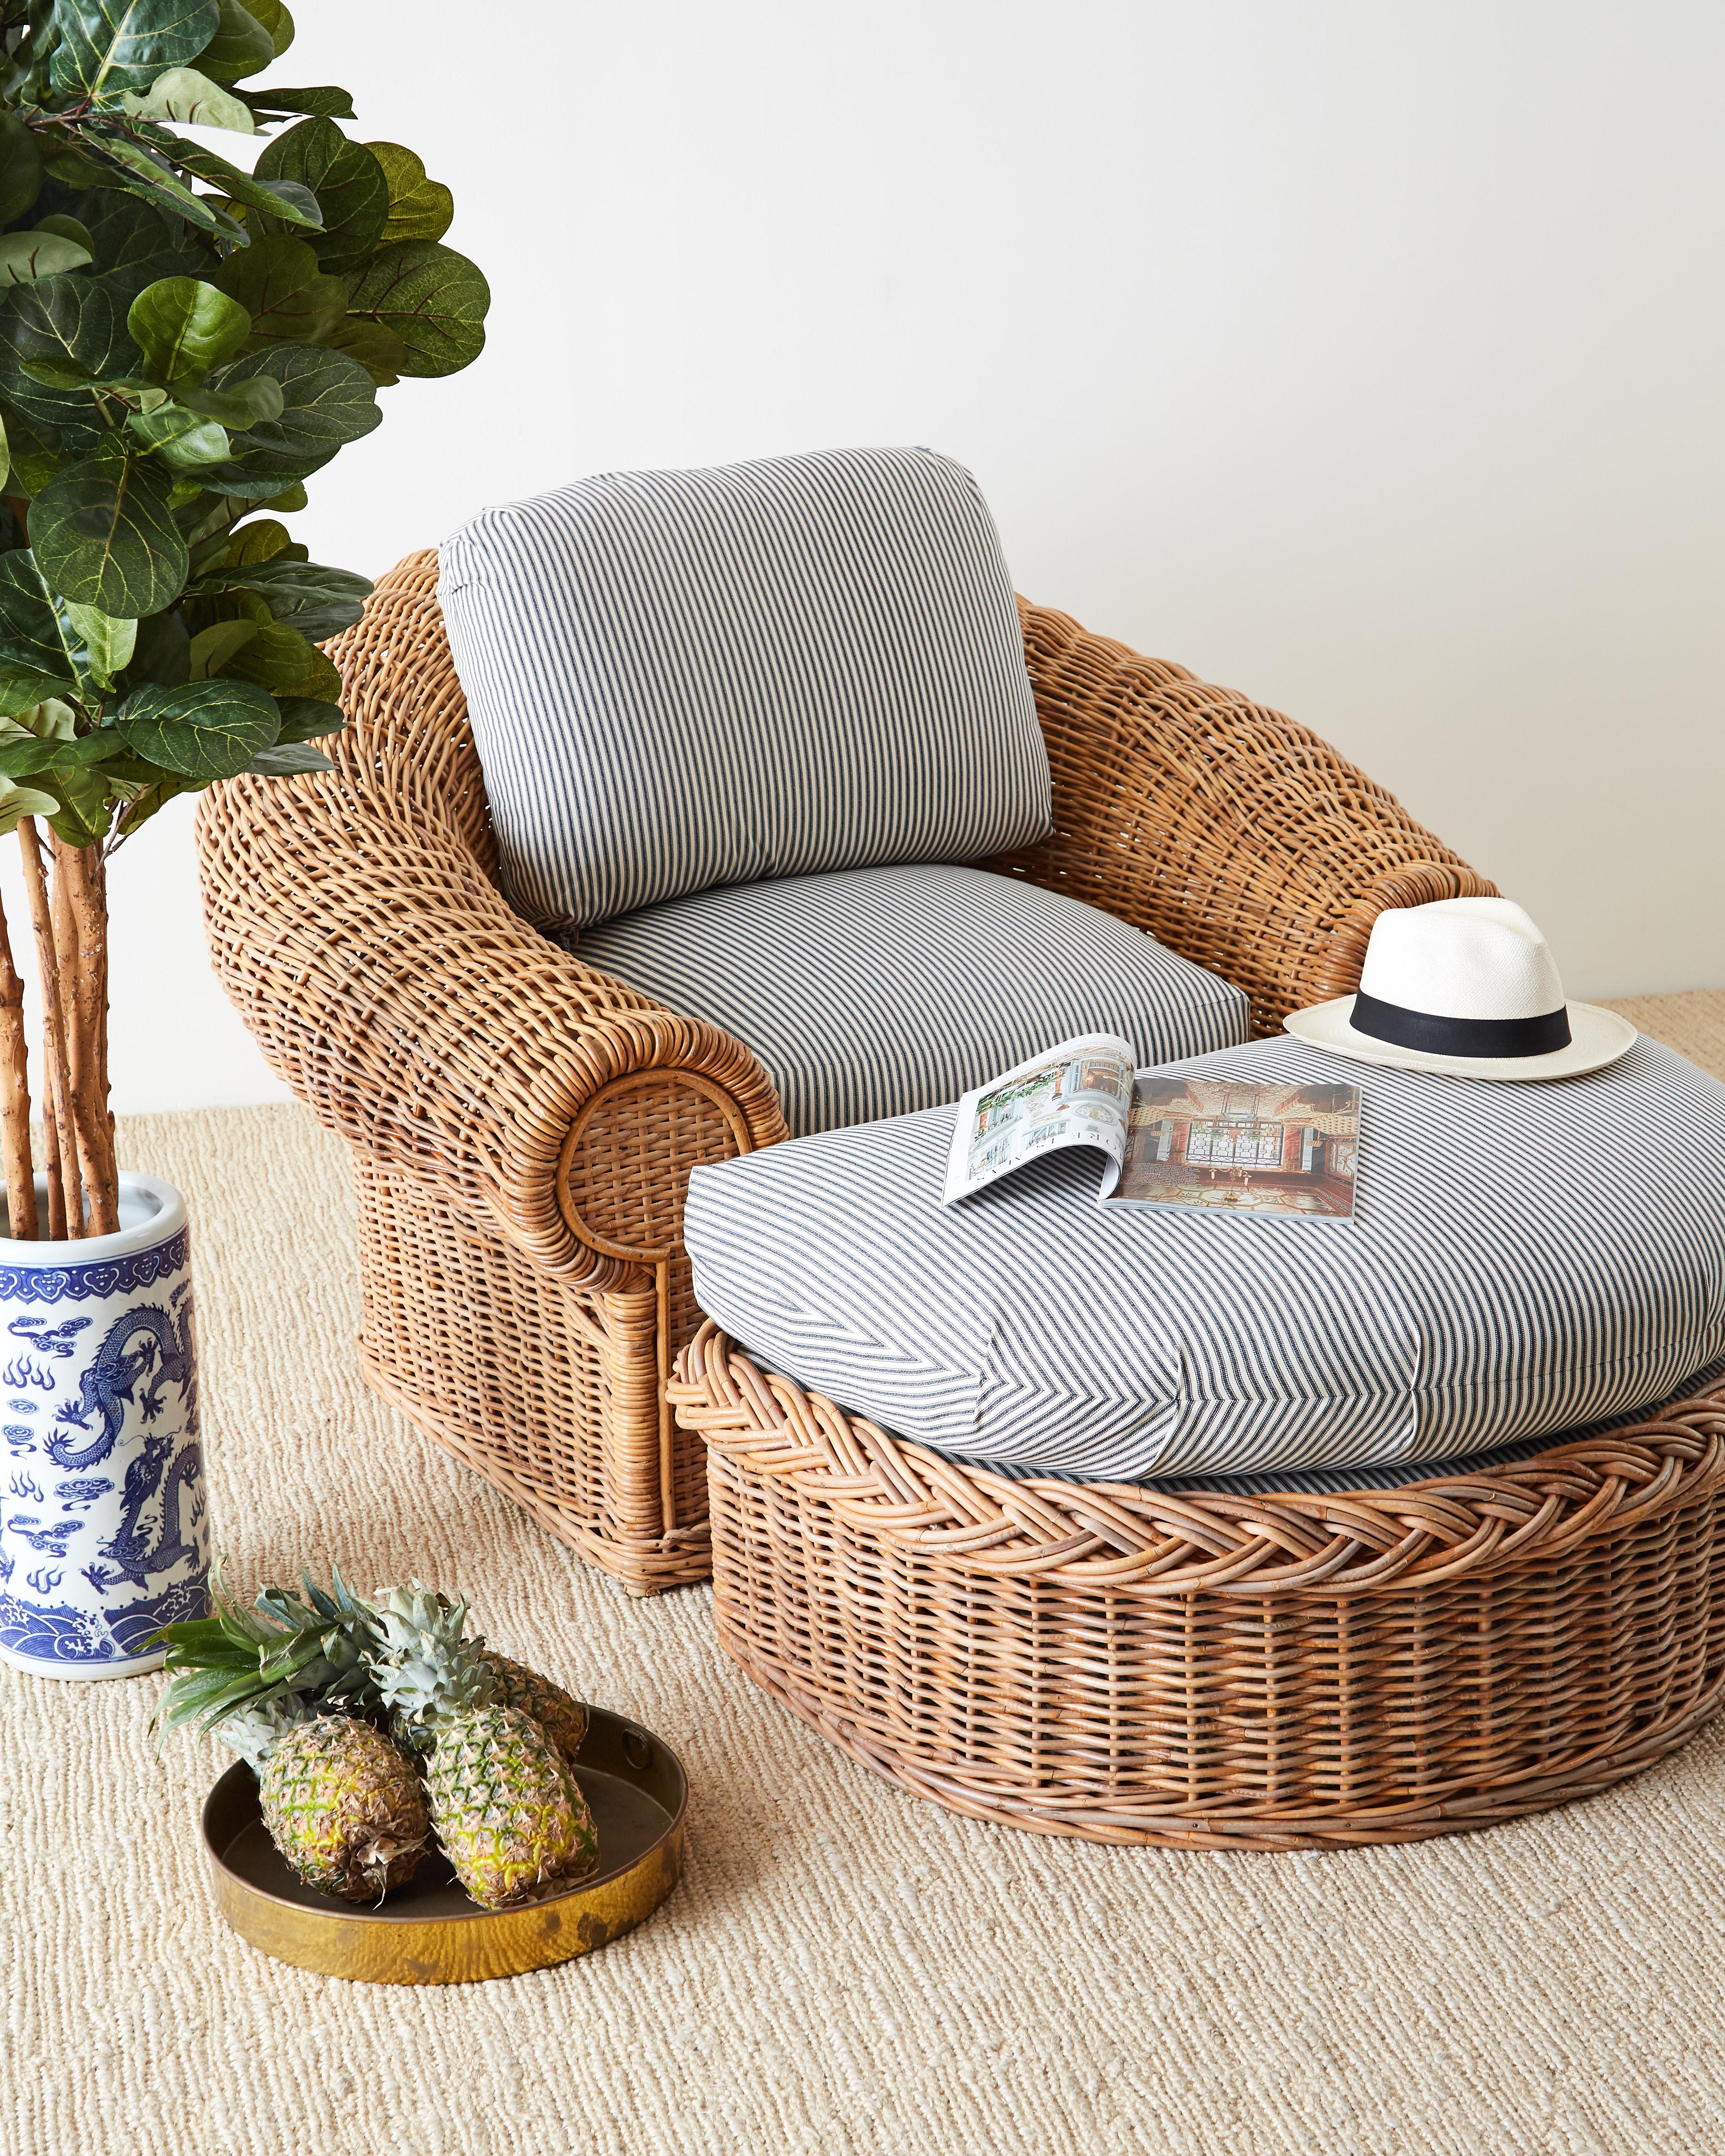 Large pair of stick wicker lounge chairs designed in the style of Michael Taylor. Two woven wicker covered frames and one demilune formed ottoman featuring newly upholstered French ticking stripe fabric in classic blue and white. These oversized